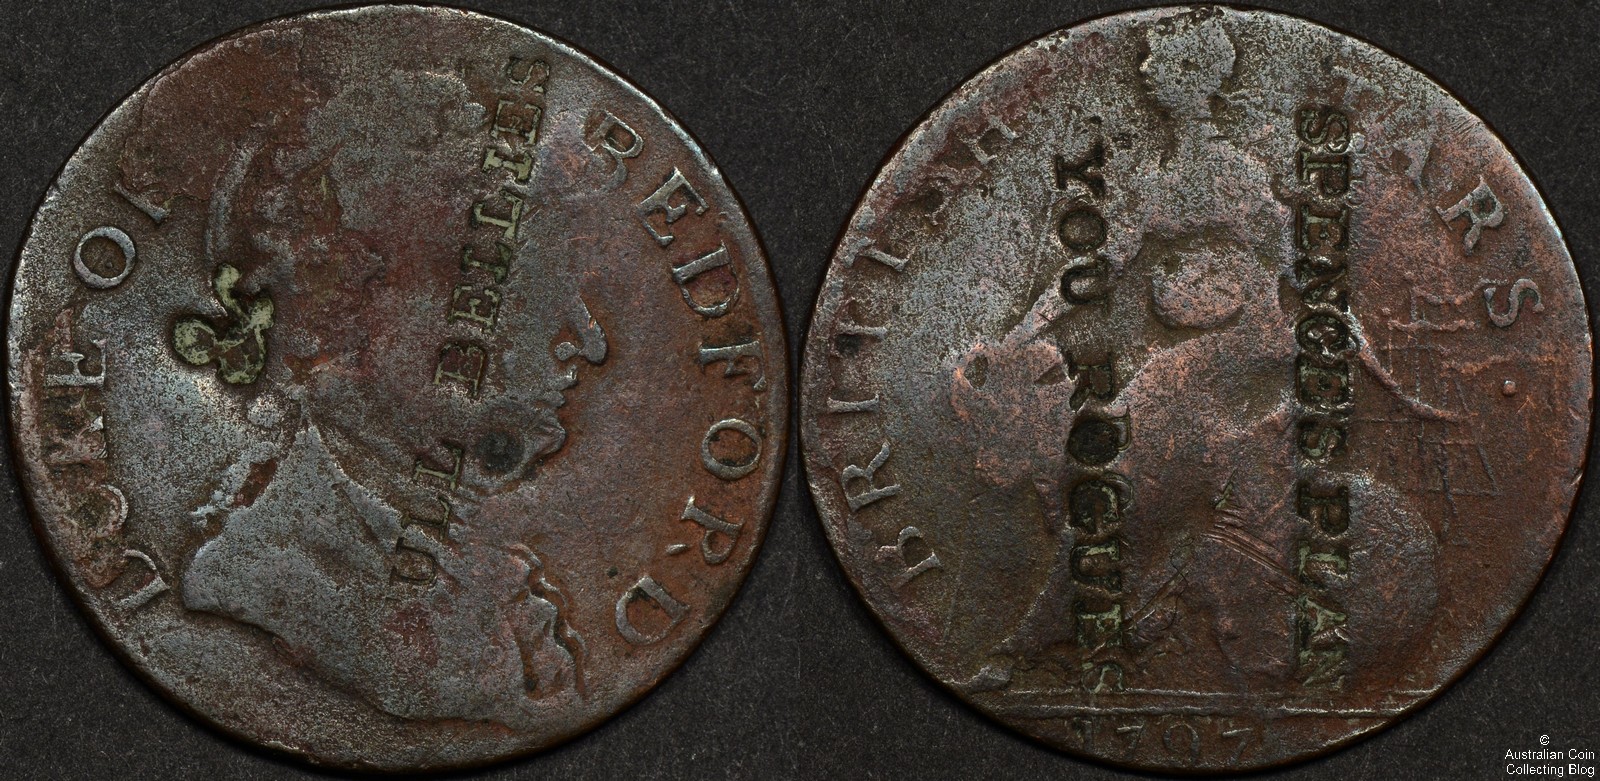 Counterfeit 1797 British Halfpenny with Counterstamps : r/coins